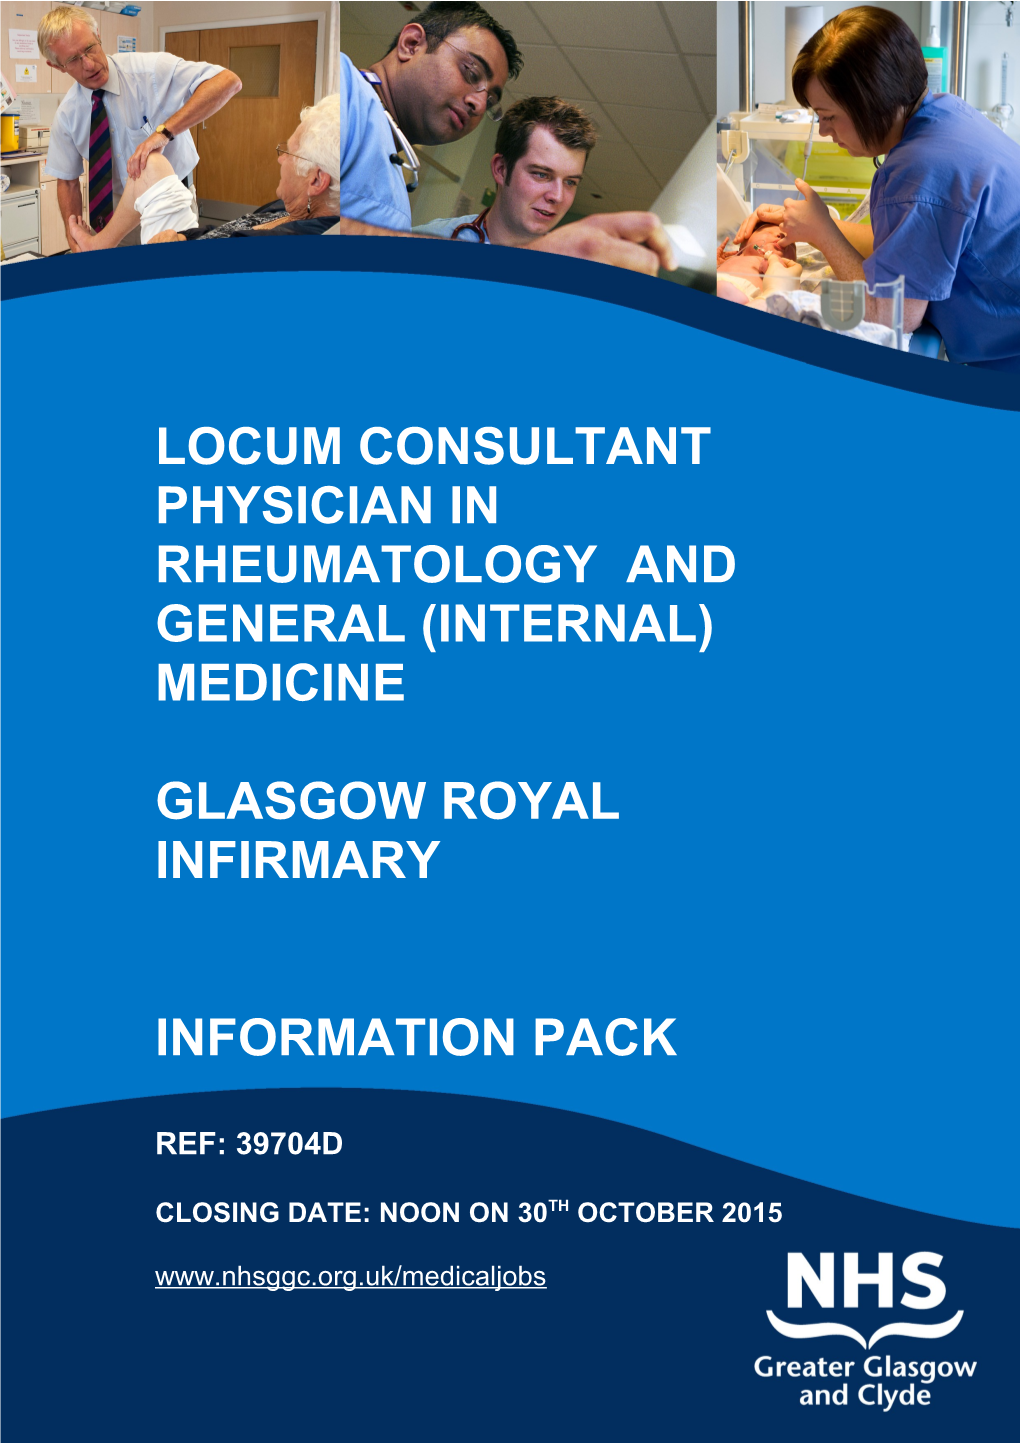 Locum Consultant Physician in Rheumatology and General (Internal) Medicine